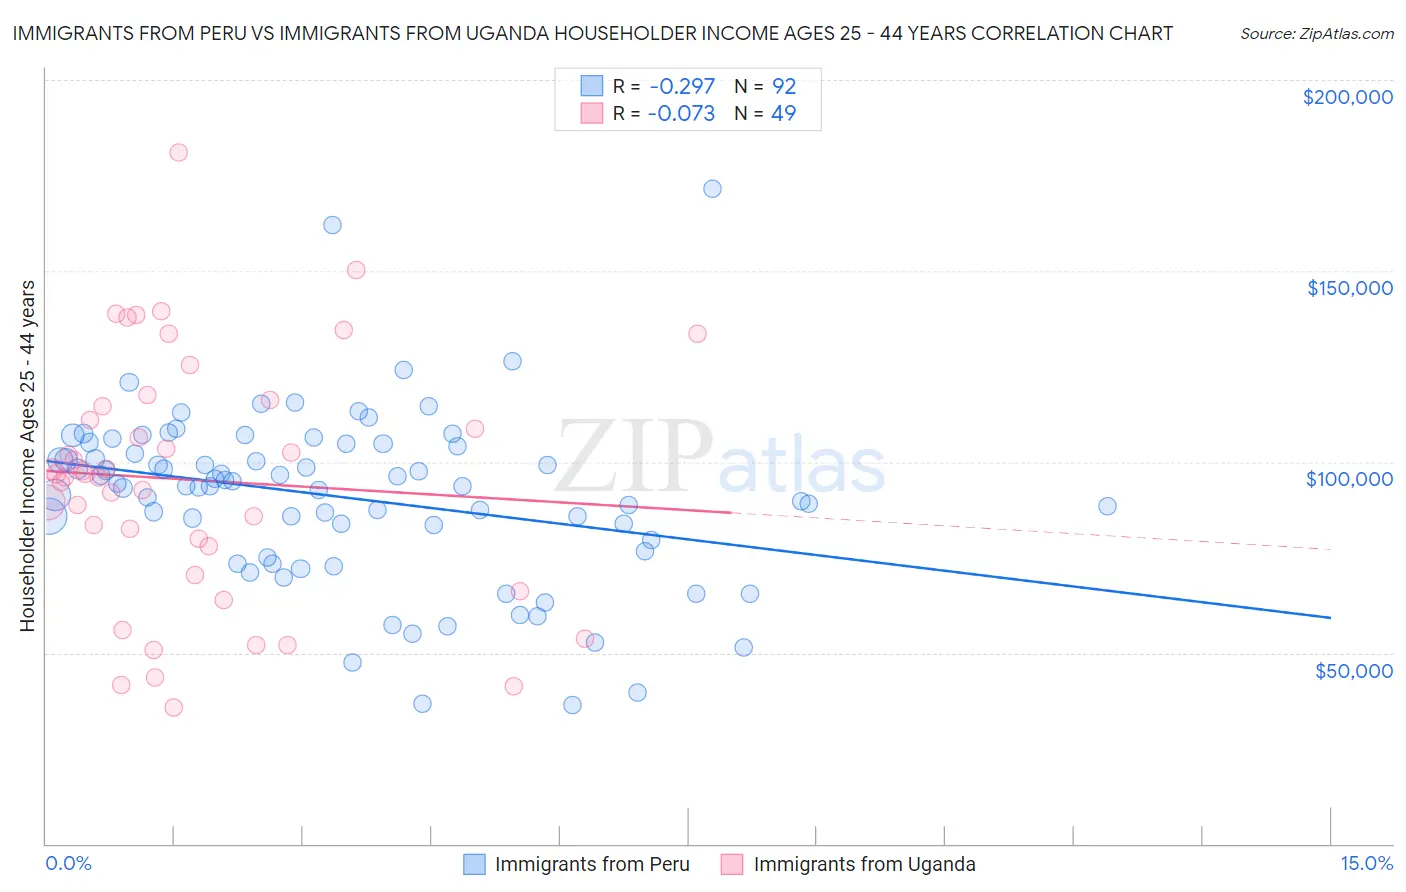 Immigrants from Peru vs Immigrants from Uganda Householder Income Ages 25 - 44 years